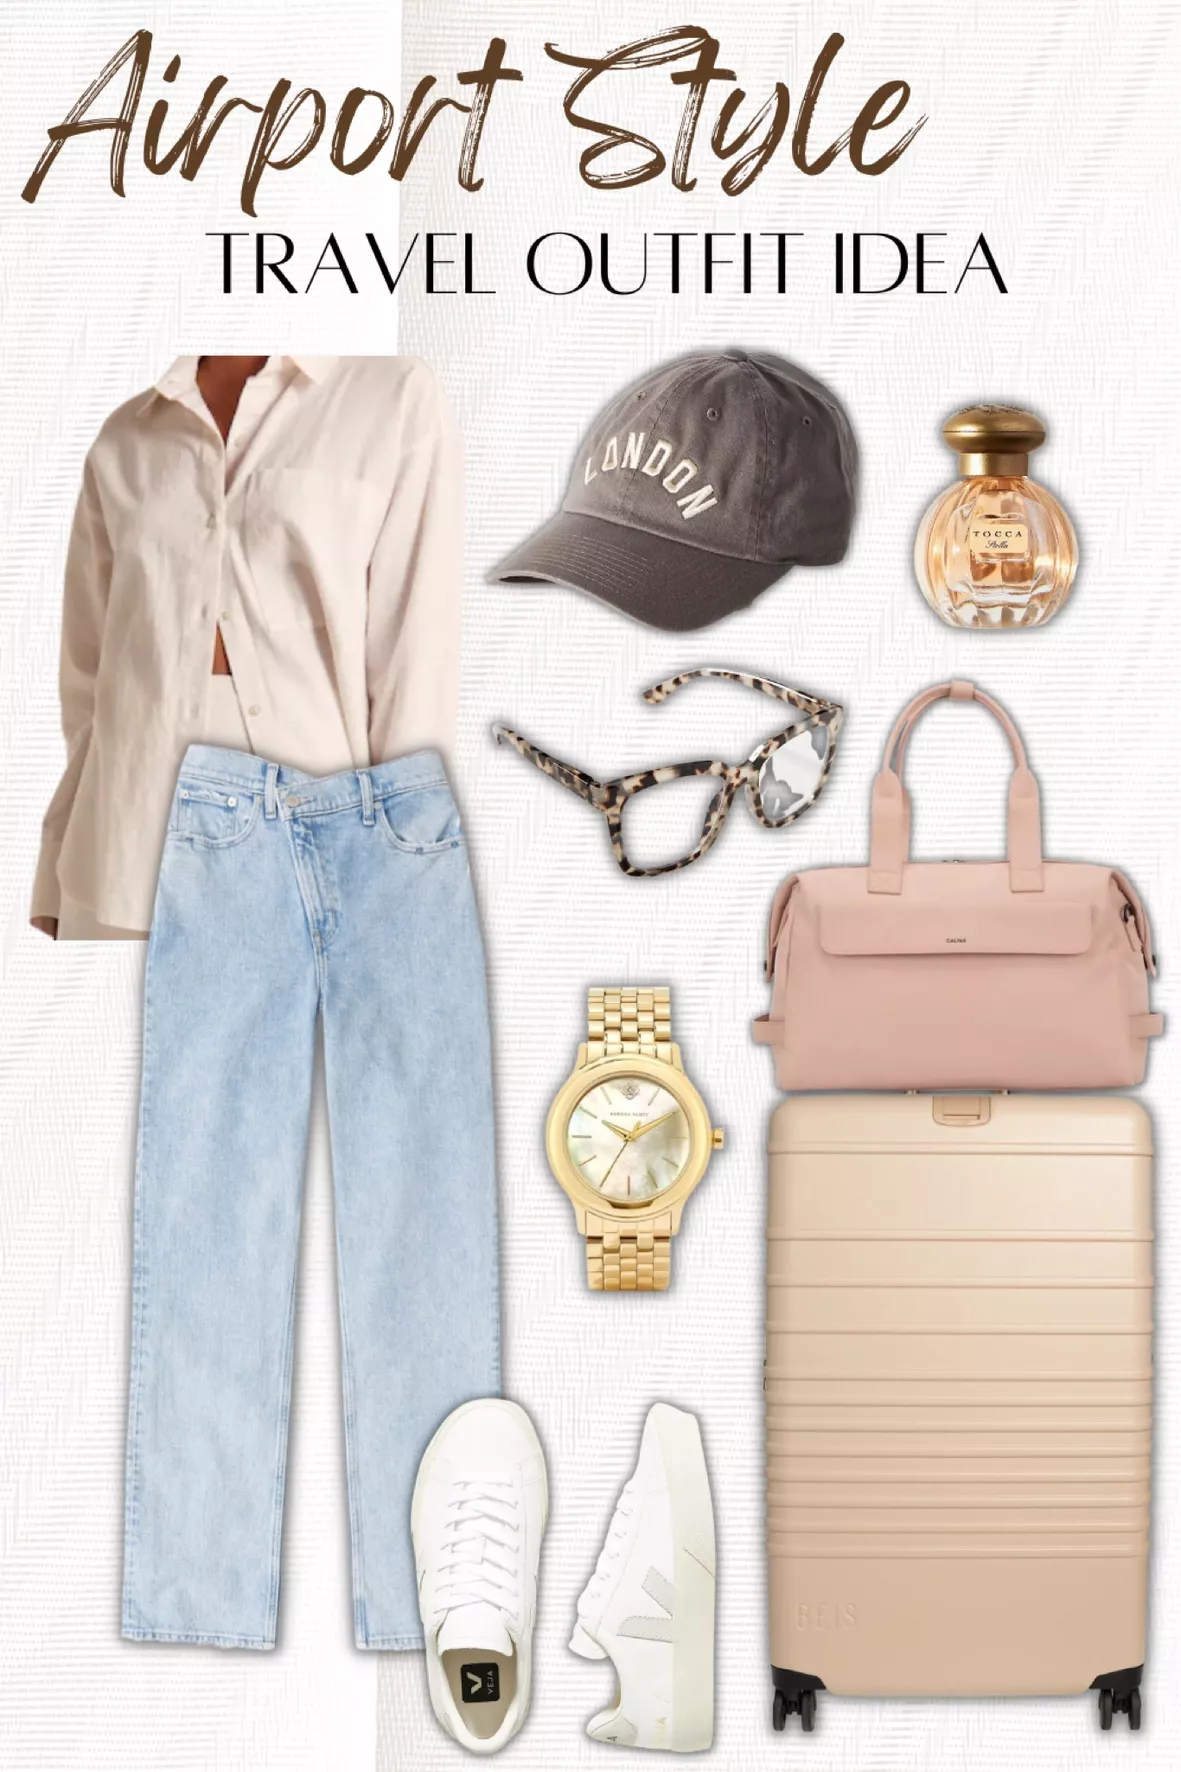 🔗 in B, 0. Airport travel outfit ideas #ltkstyle #ltkfashion #ltkstyle